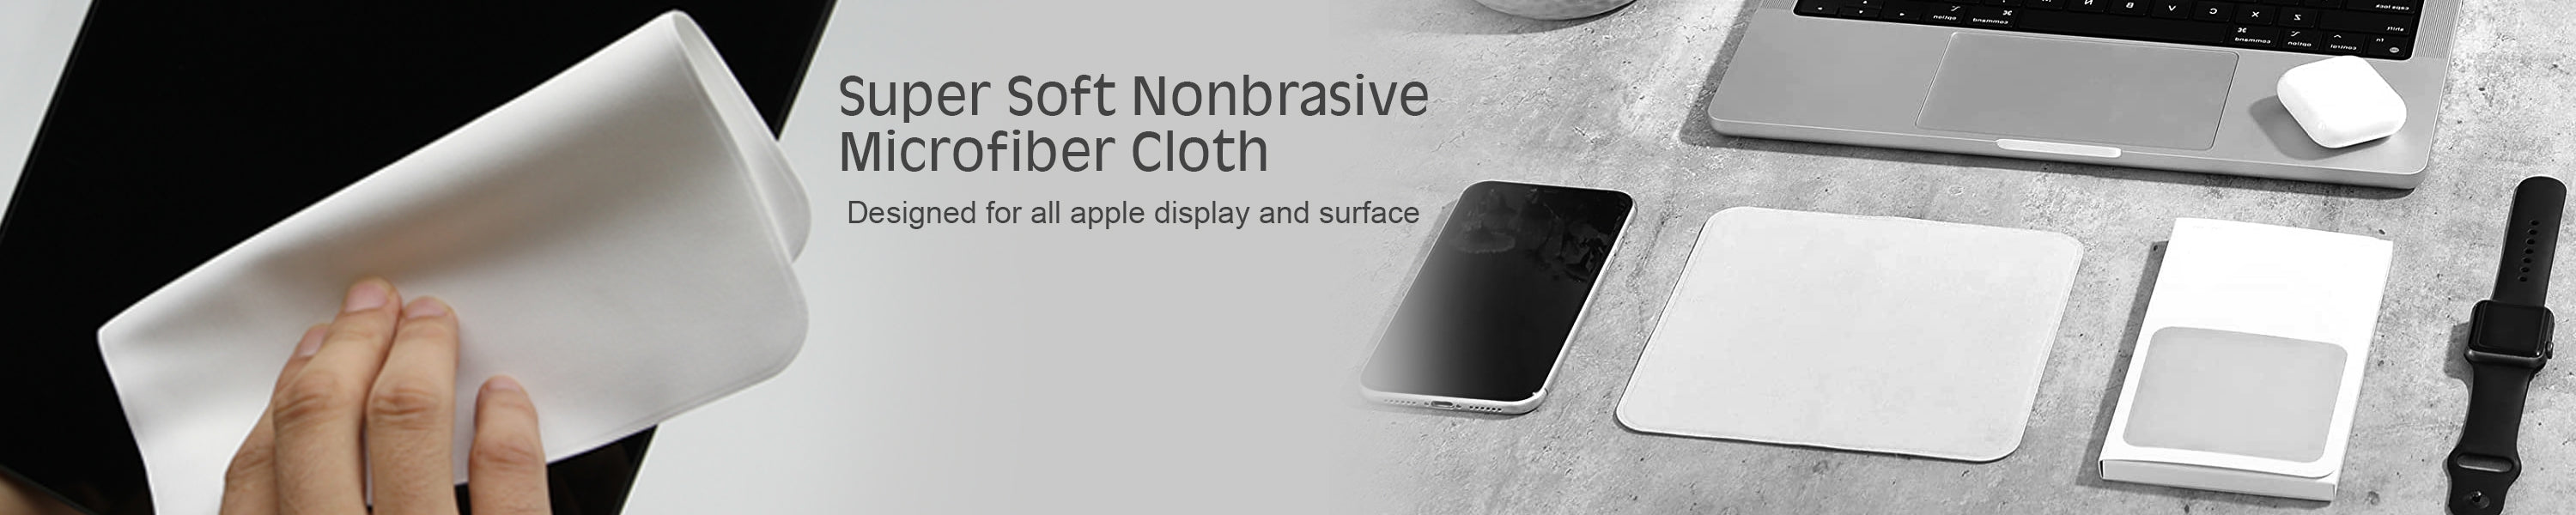 Apple cleaning cloth